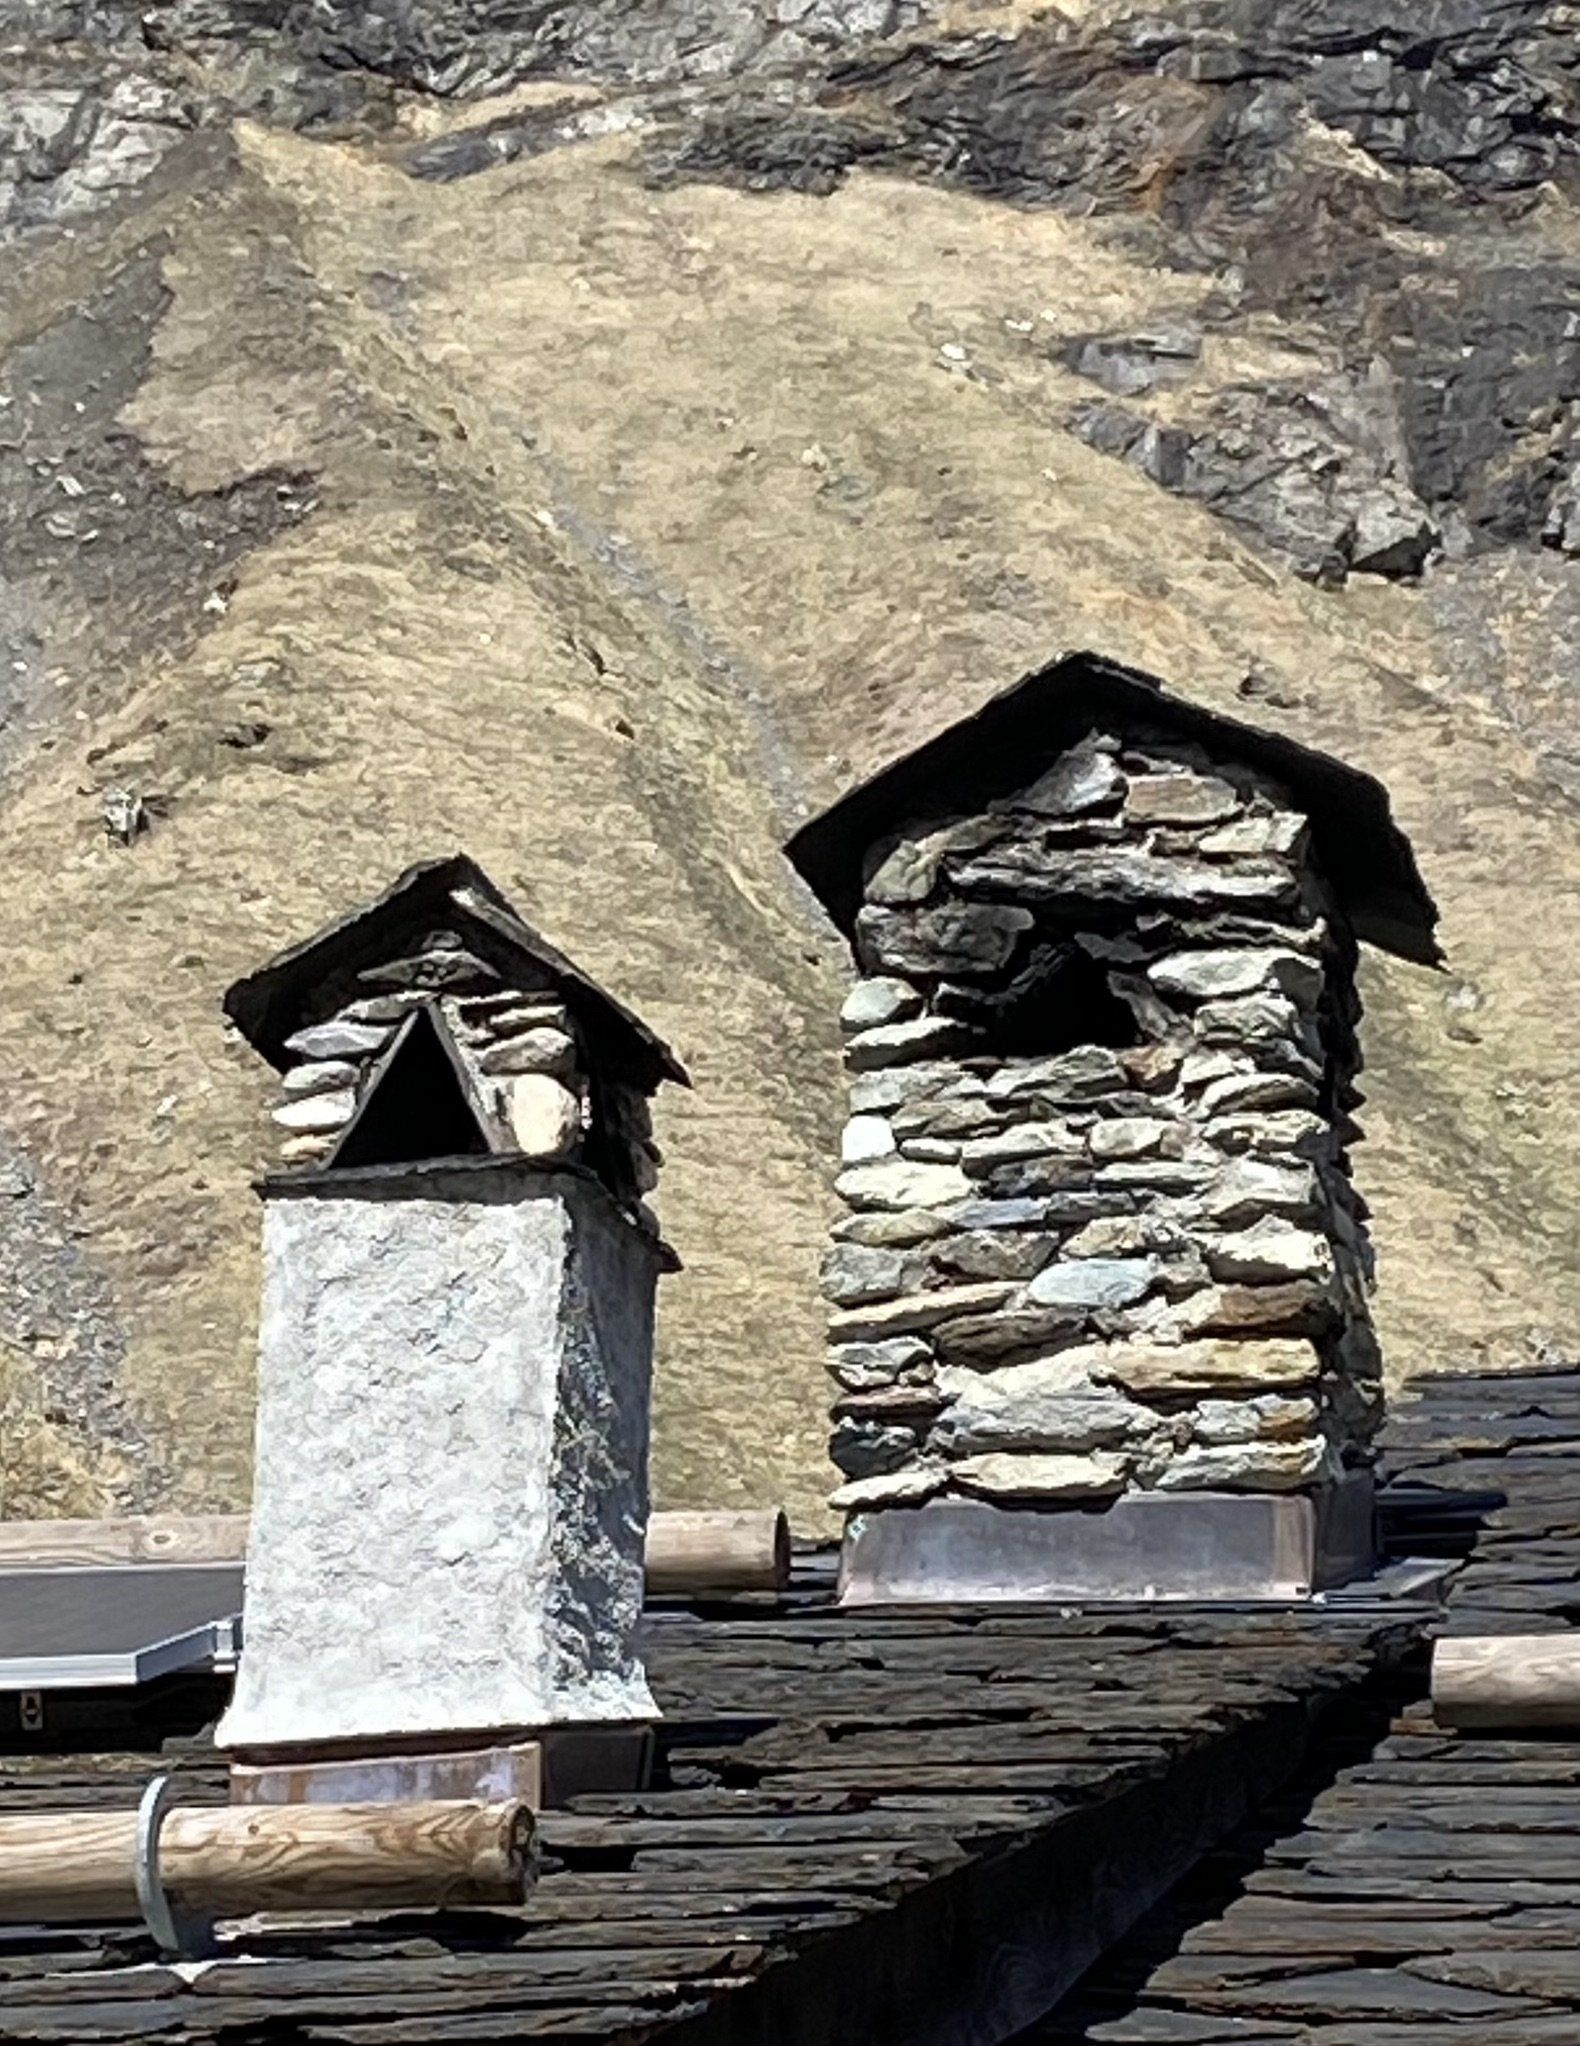 Chimney Stacks in the Tarentaise Valley